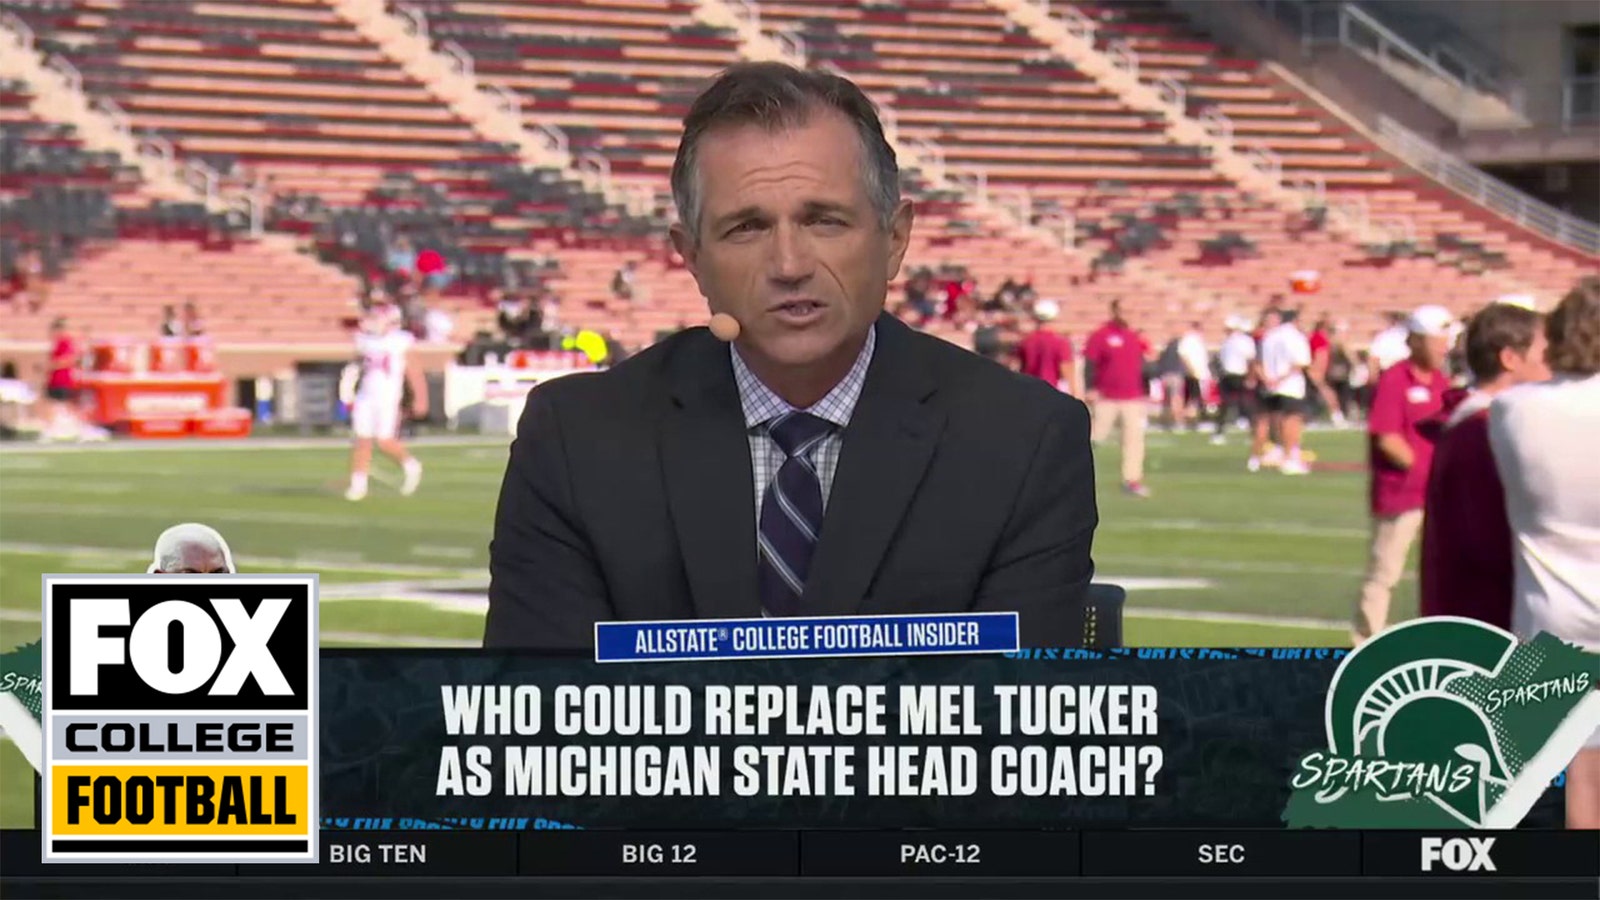 Bruce Feldman on who could replace Mel Tucker at Michigan State